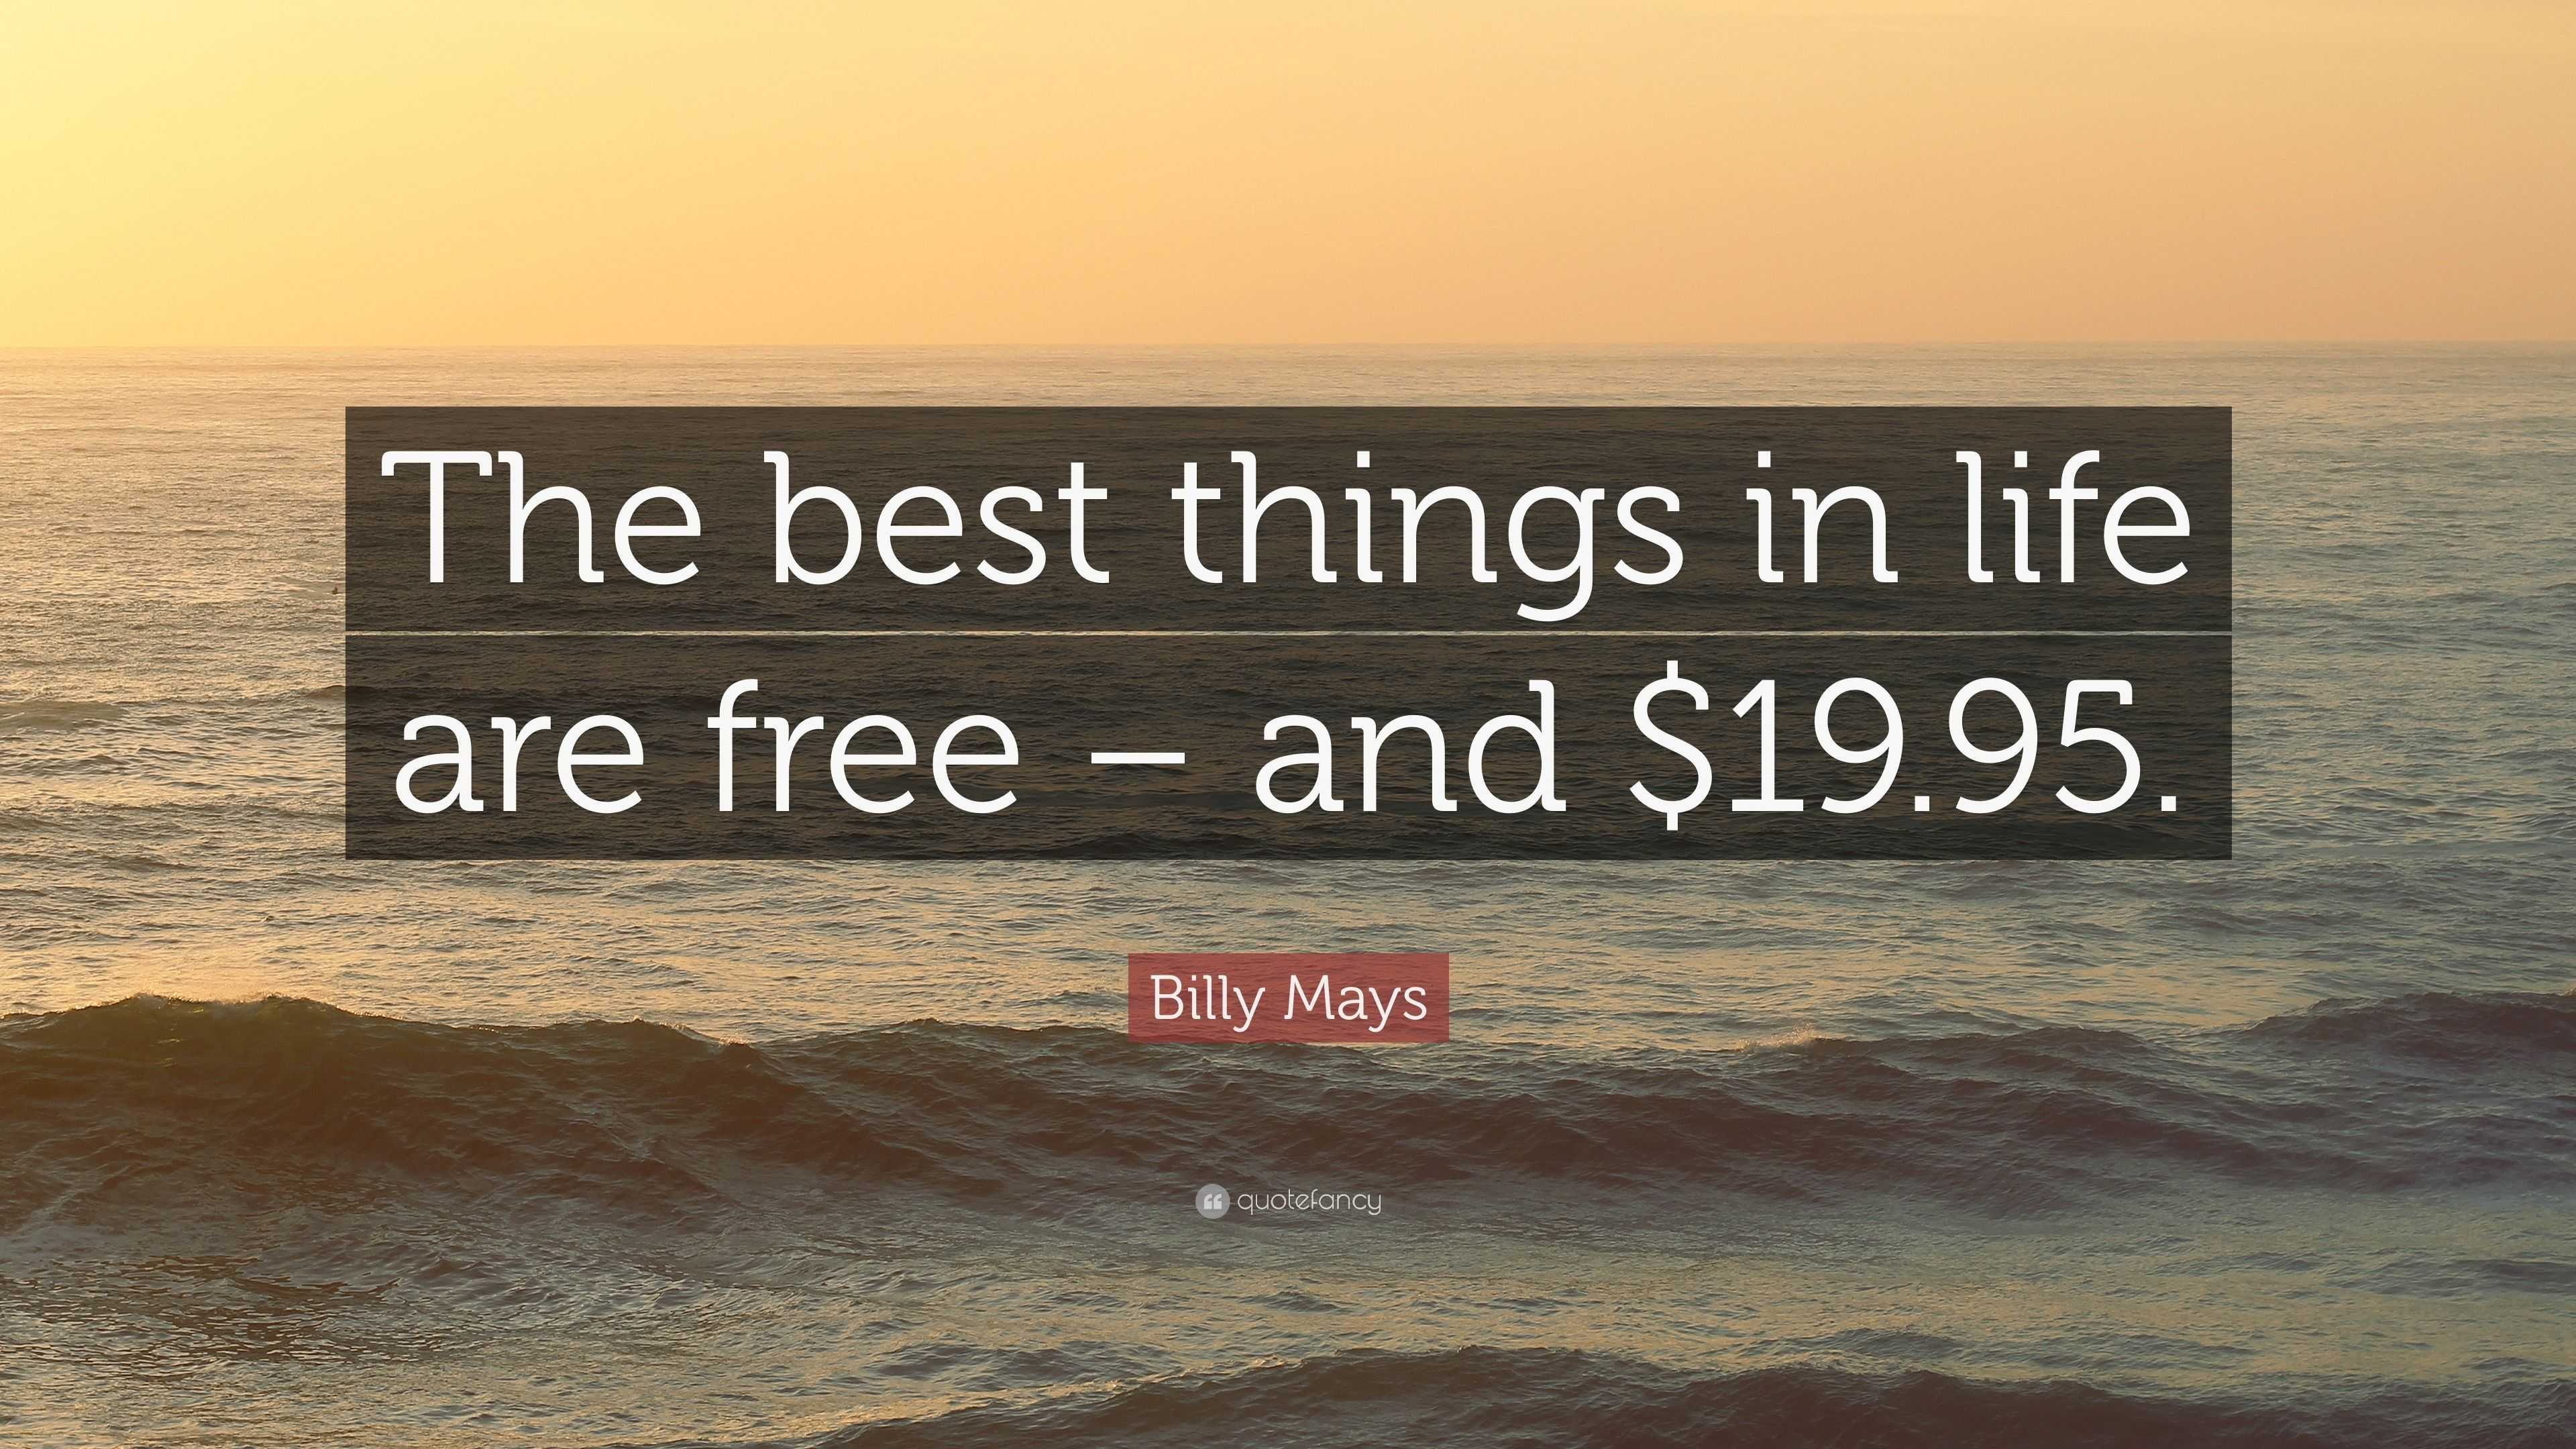 Billy Mays Quote “The best things in life are free – and $19 95